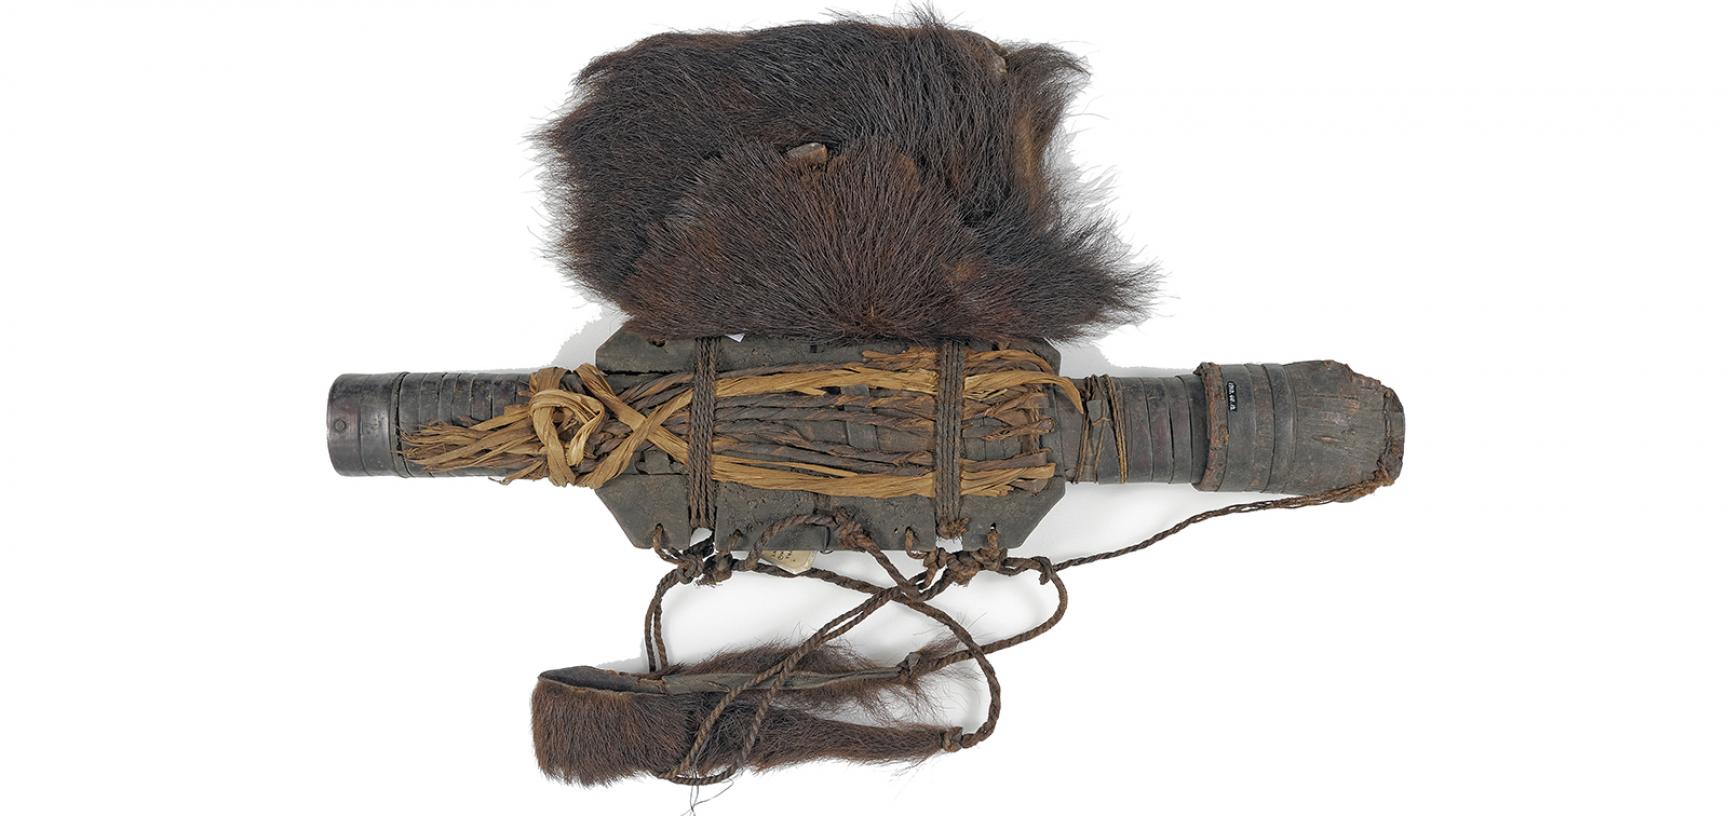 Ainu hunting quiver (1910.68.12) after conservation